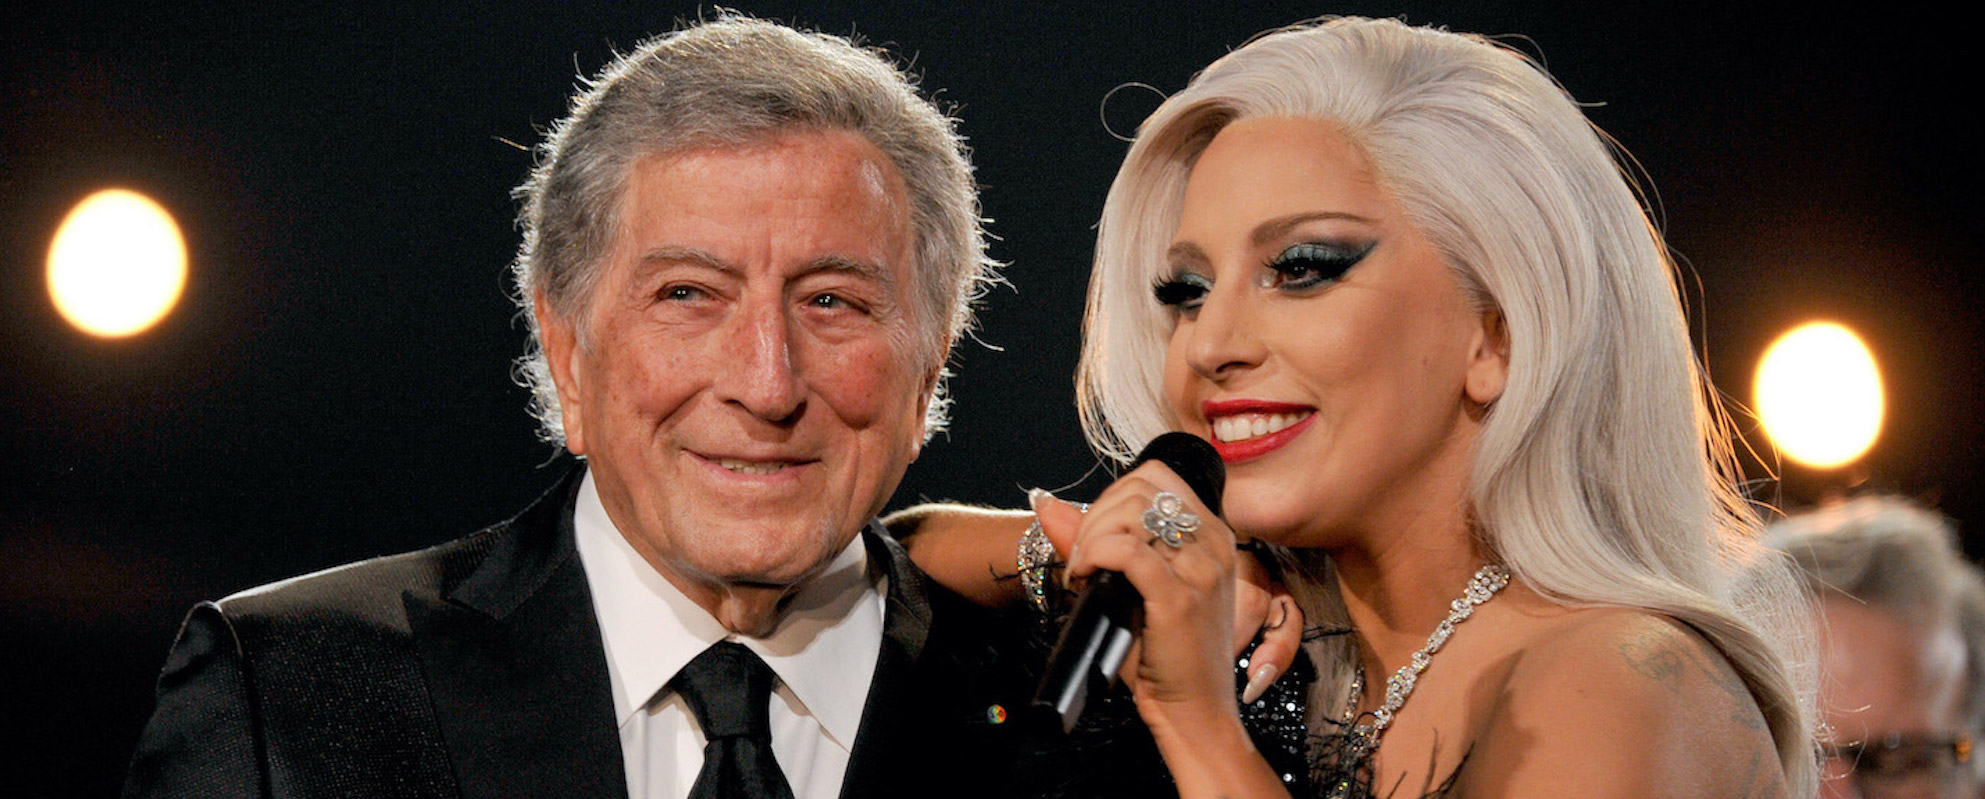 Tony Bennett and Lady Gaga Share Clip of ‘MTV Unplugged’ Performance